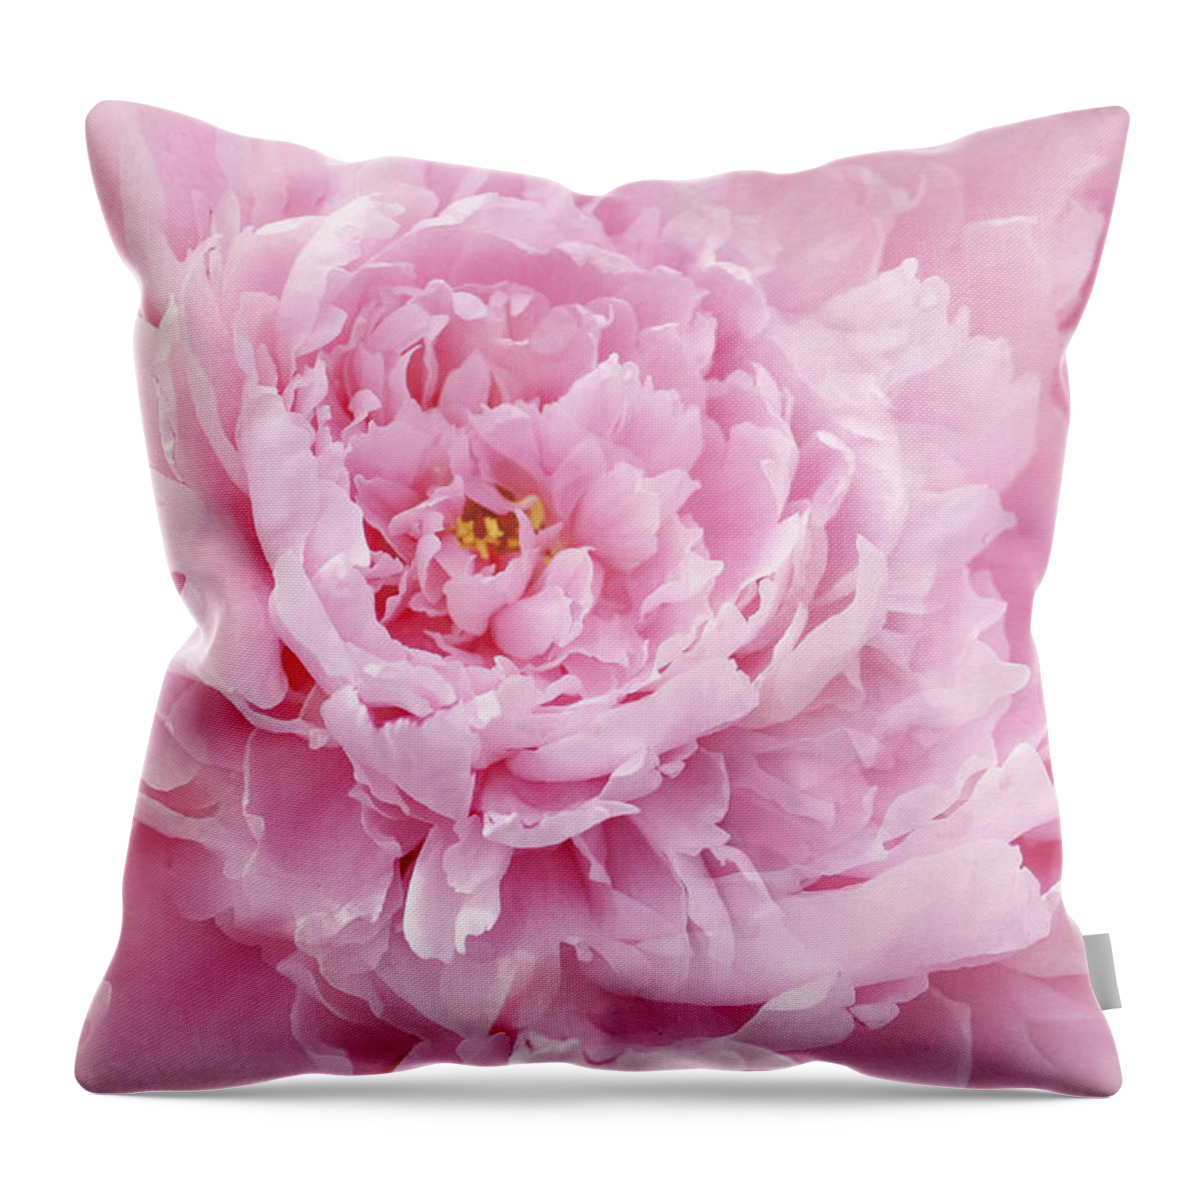 Peony Throw Pillow featuring the photograph Pink Feathers by Marina Kojukhova